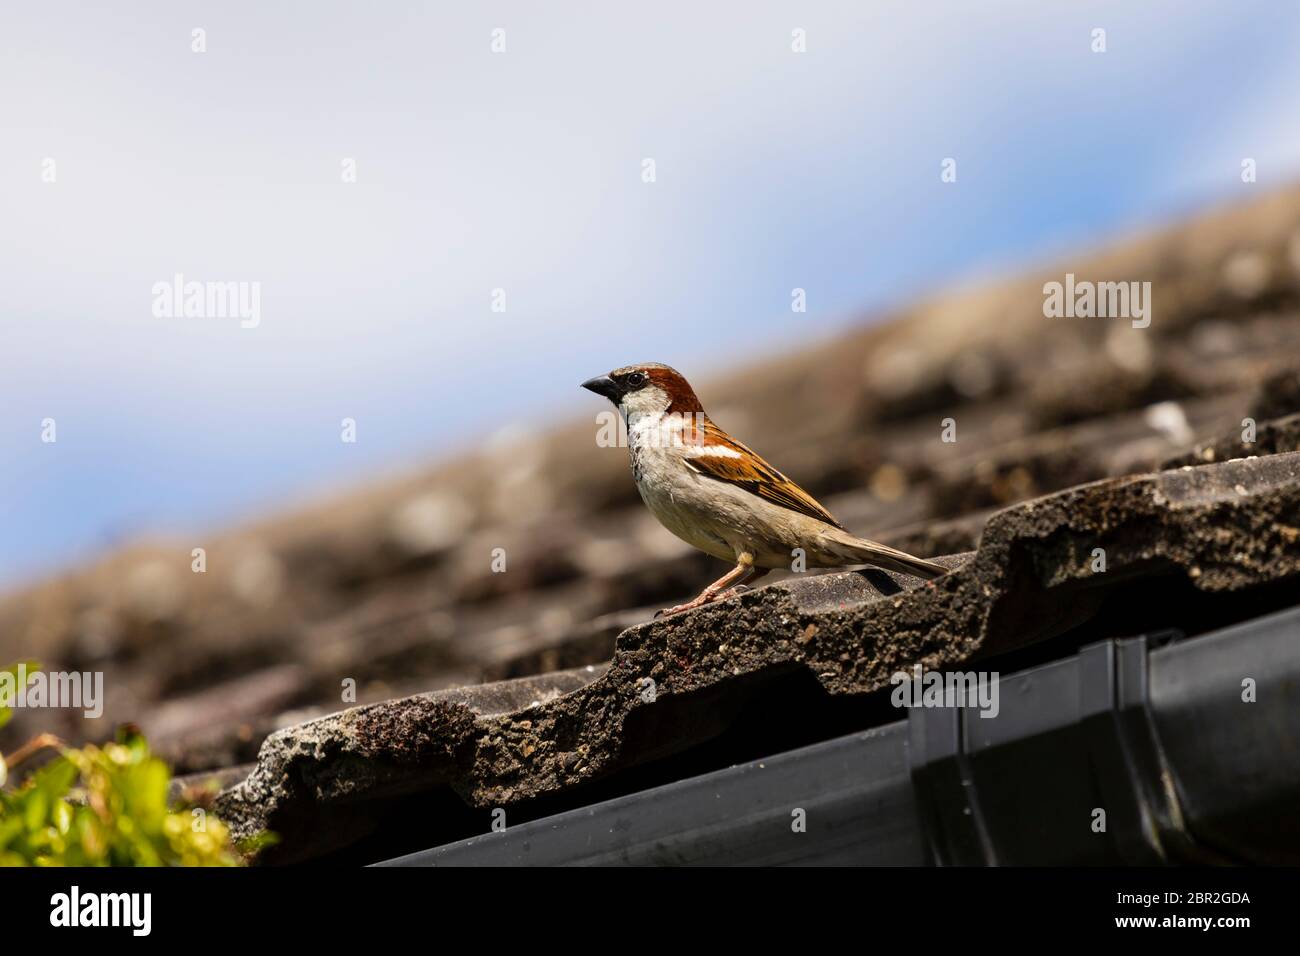 Adult, male, Common House sparrow, Passer Domesticus, on roof tiles Stock Photo